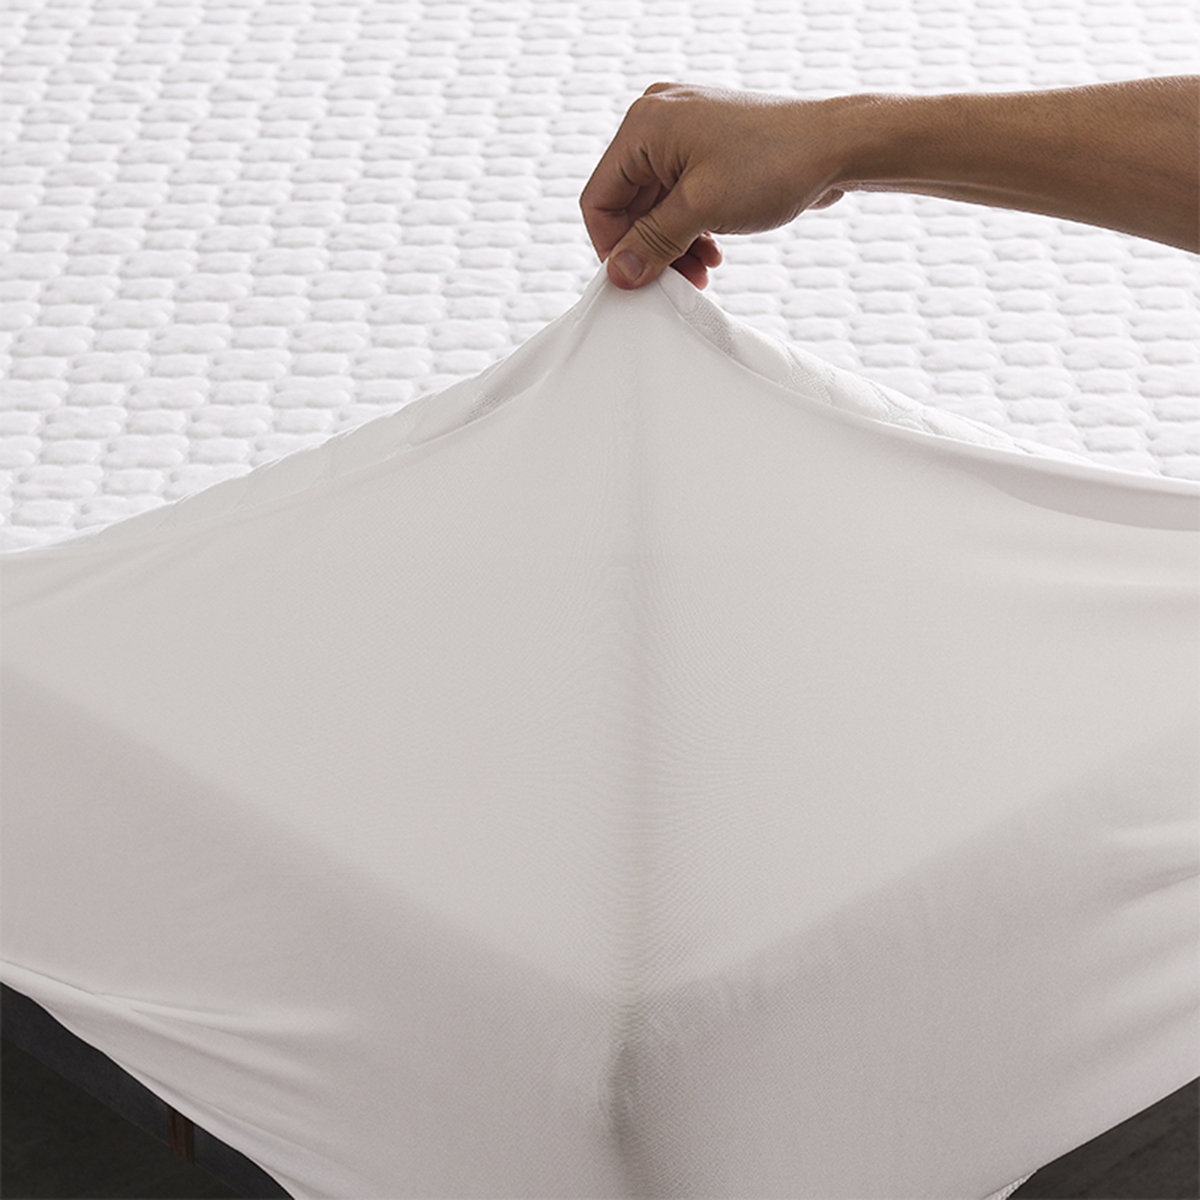 Multi-size-Washable-White-Quilted-Mattress-Covers-Waterproof-Protector-Pad-With-Tightly-Elastic-Band-1692754-16